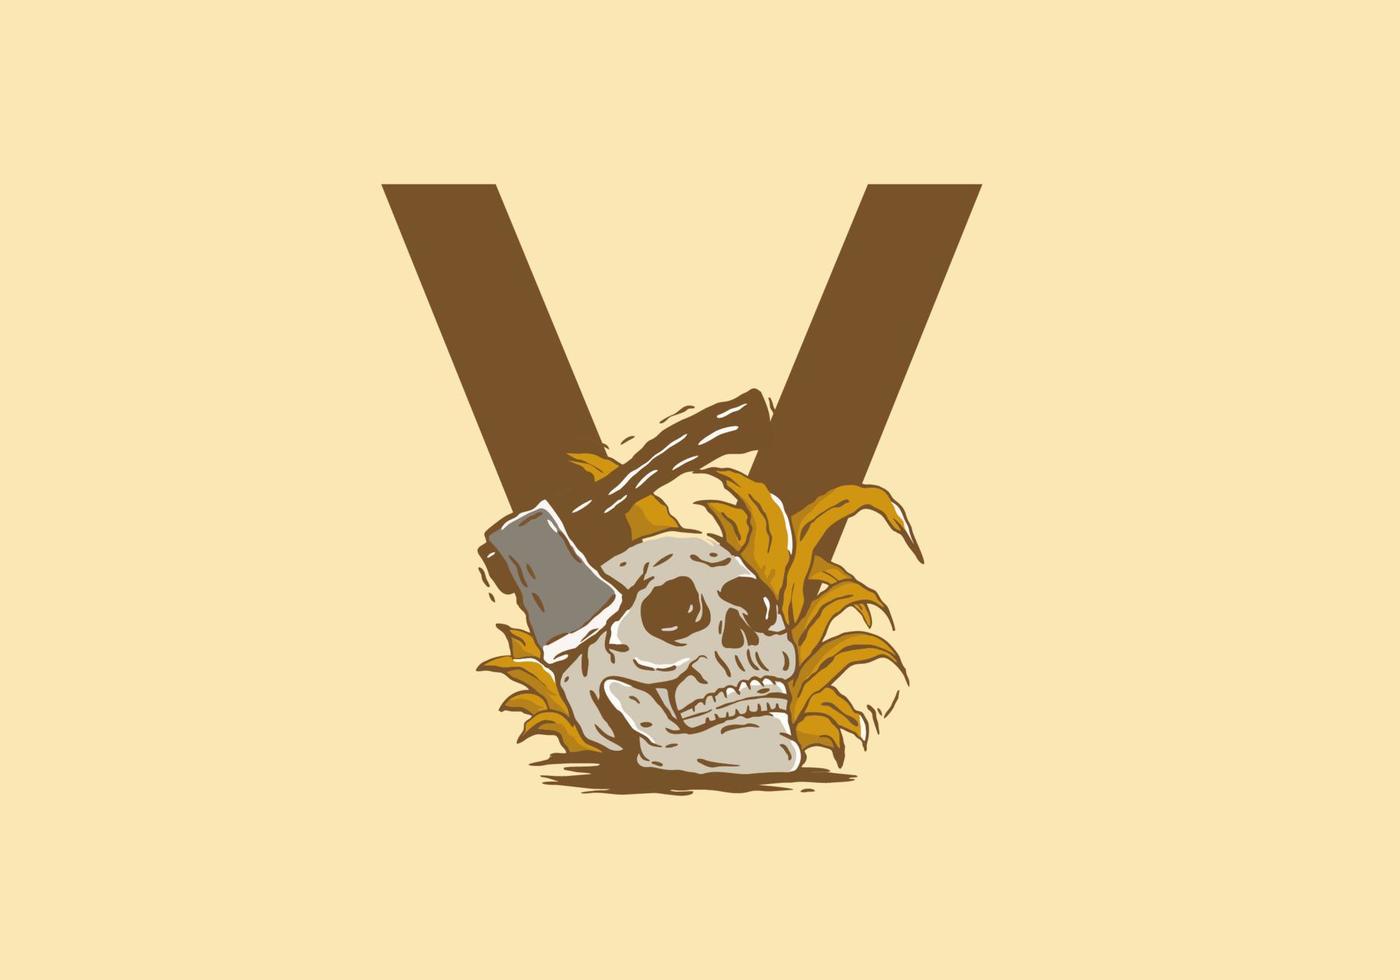 Skeleton head and ax illustration drawing with V initial letter vector